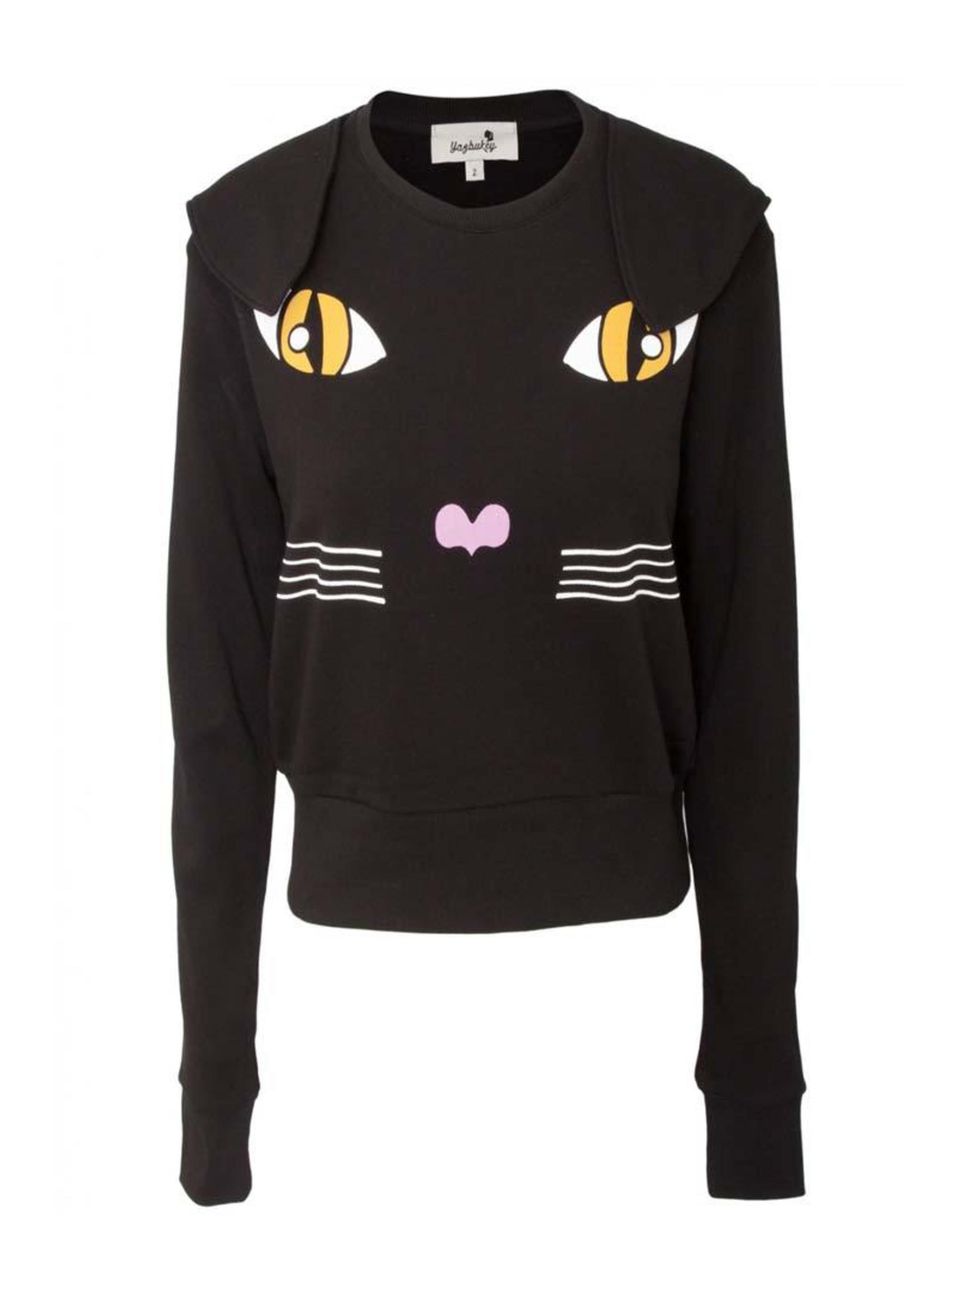 <p>The cat's meow, soon to be worn by Acting Senior Fashion Editor Michelle Duguid.</p>

<p>Yazbukey sweatshirt, £90 at <a href="http://www.hervia.com/womens-c1/clothing-c78/sweatshirts-jumpers-c184/cat-with-ears-crew-sweatshirt-black-p13088" target="_bla